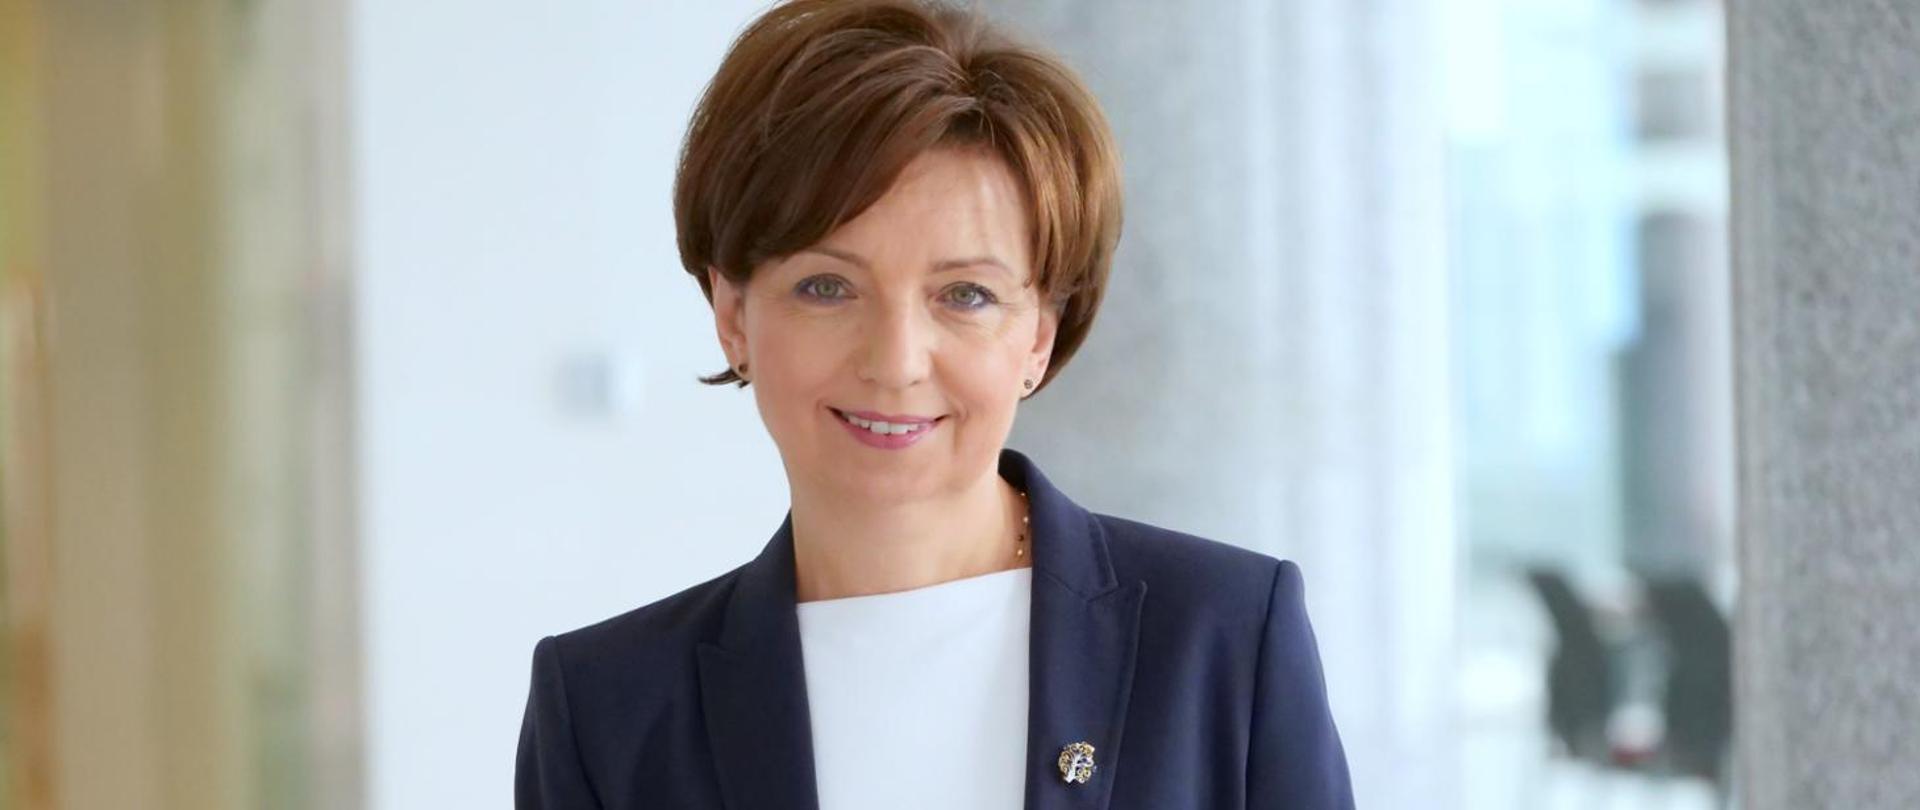 Marlena Maląg, Minister of Family and Social Policy